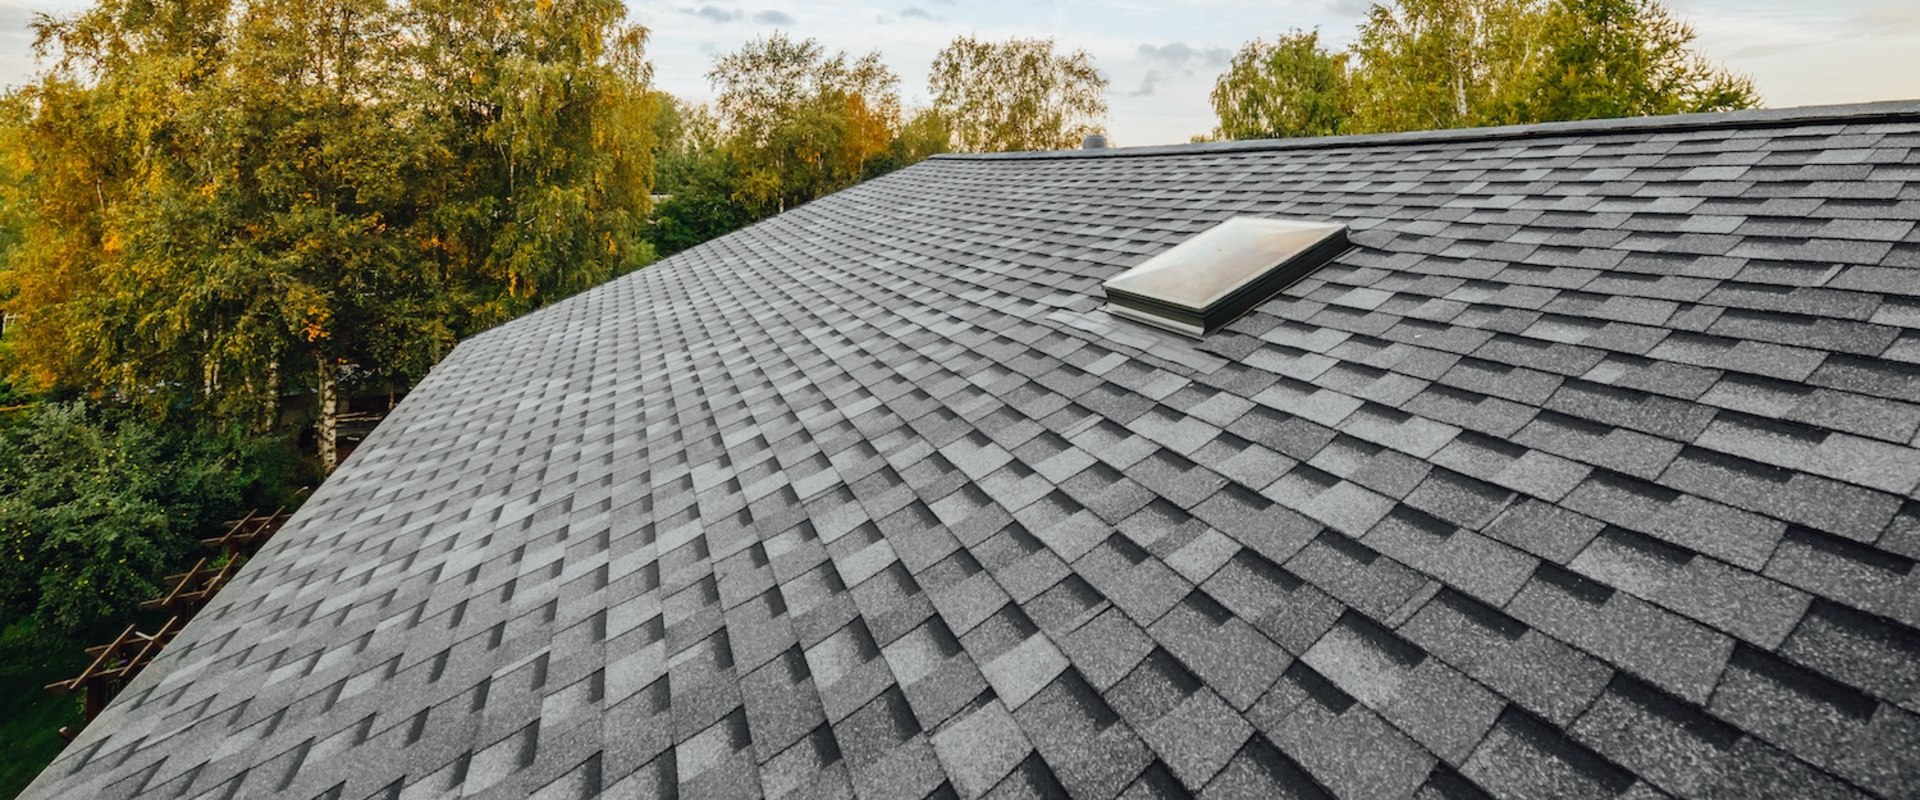 What Type of Warranties Do Roofing Companies in Wilmington NC Offer?